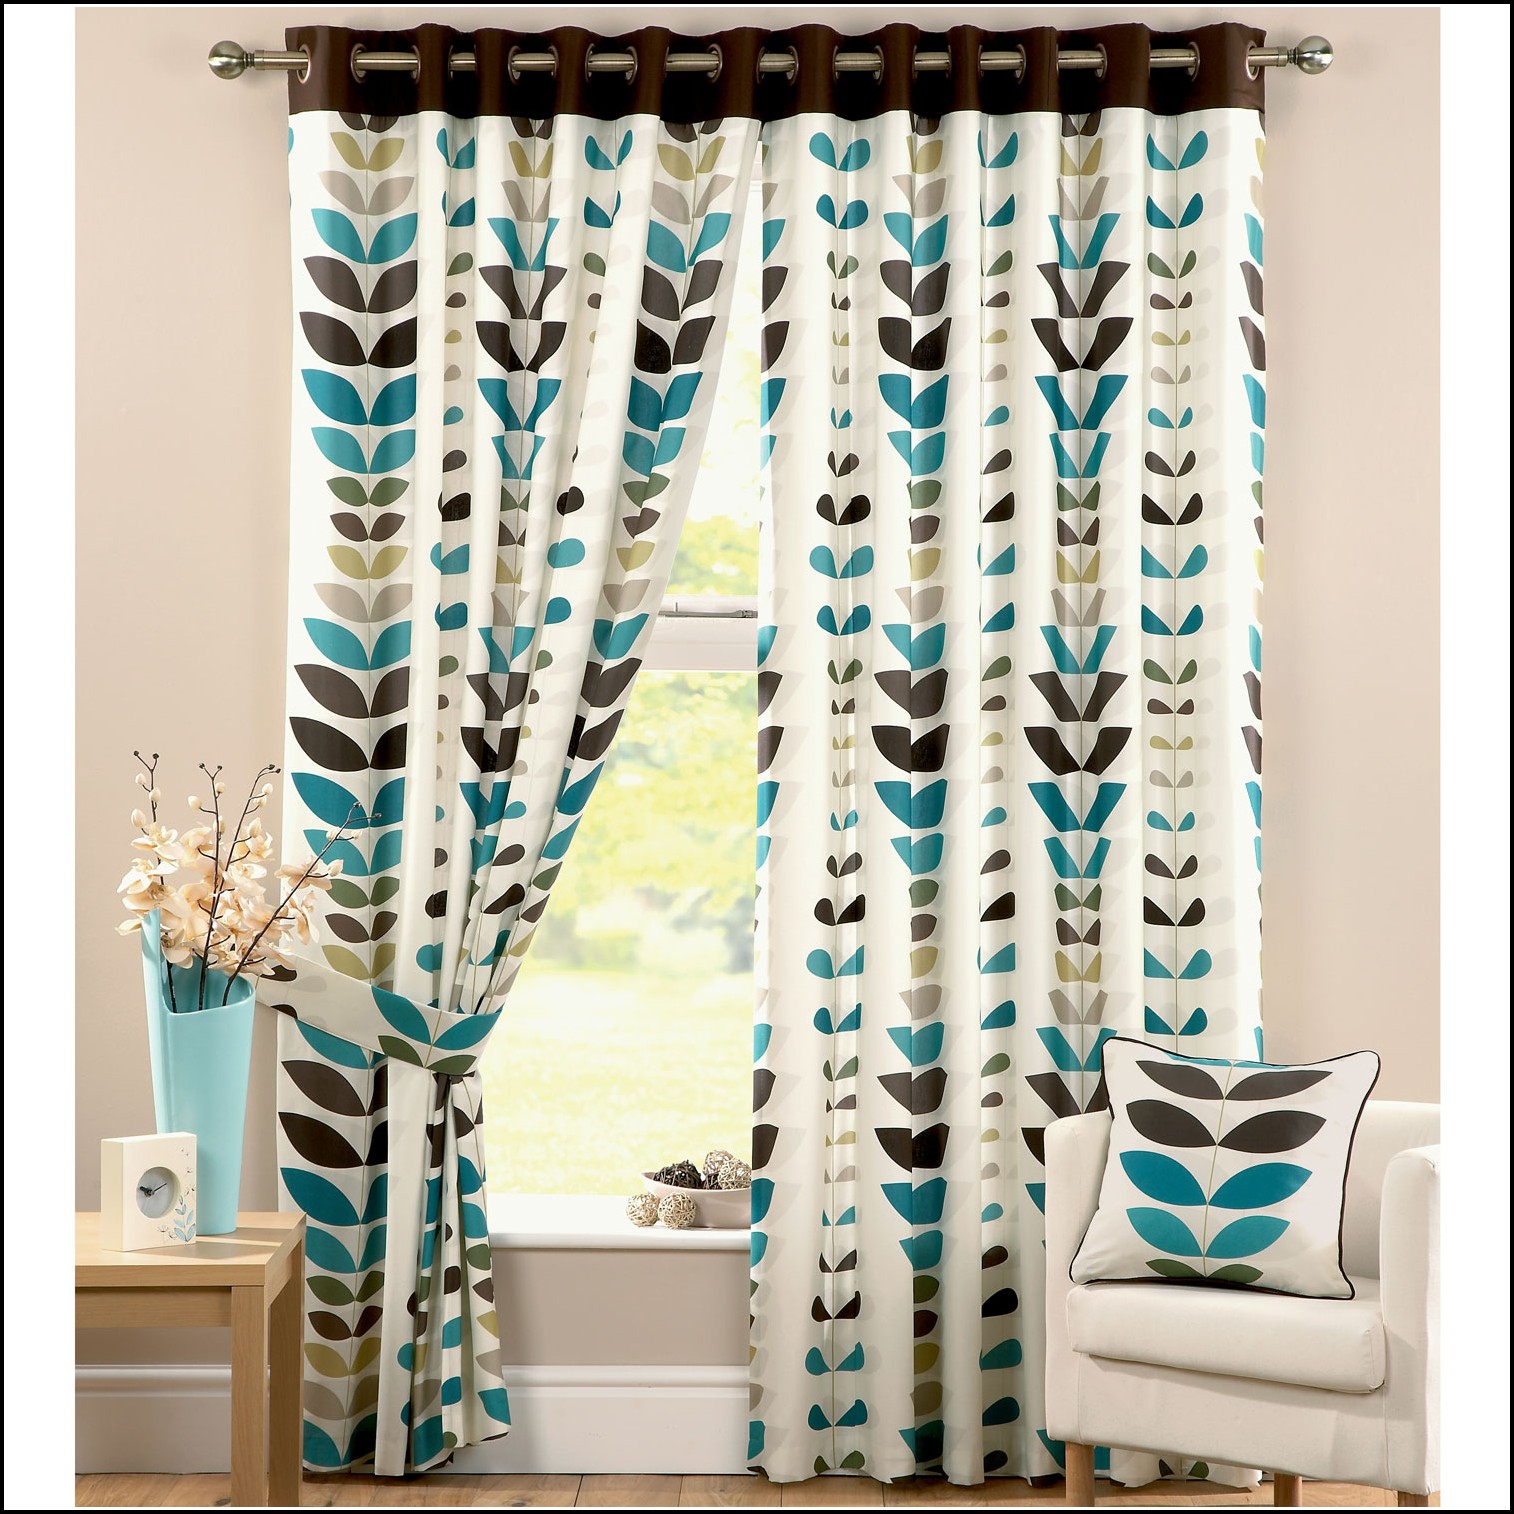 Teal And Black Curtains - www.inf-inet.com